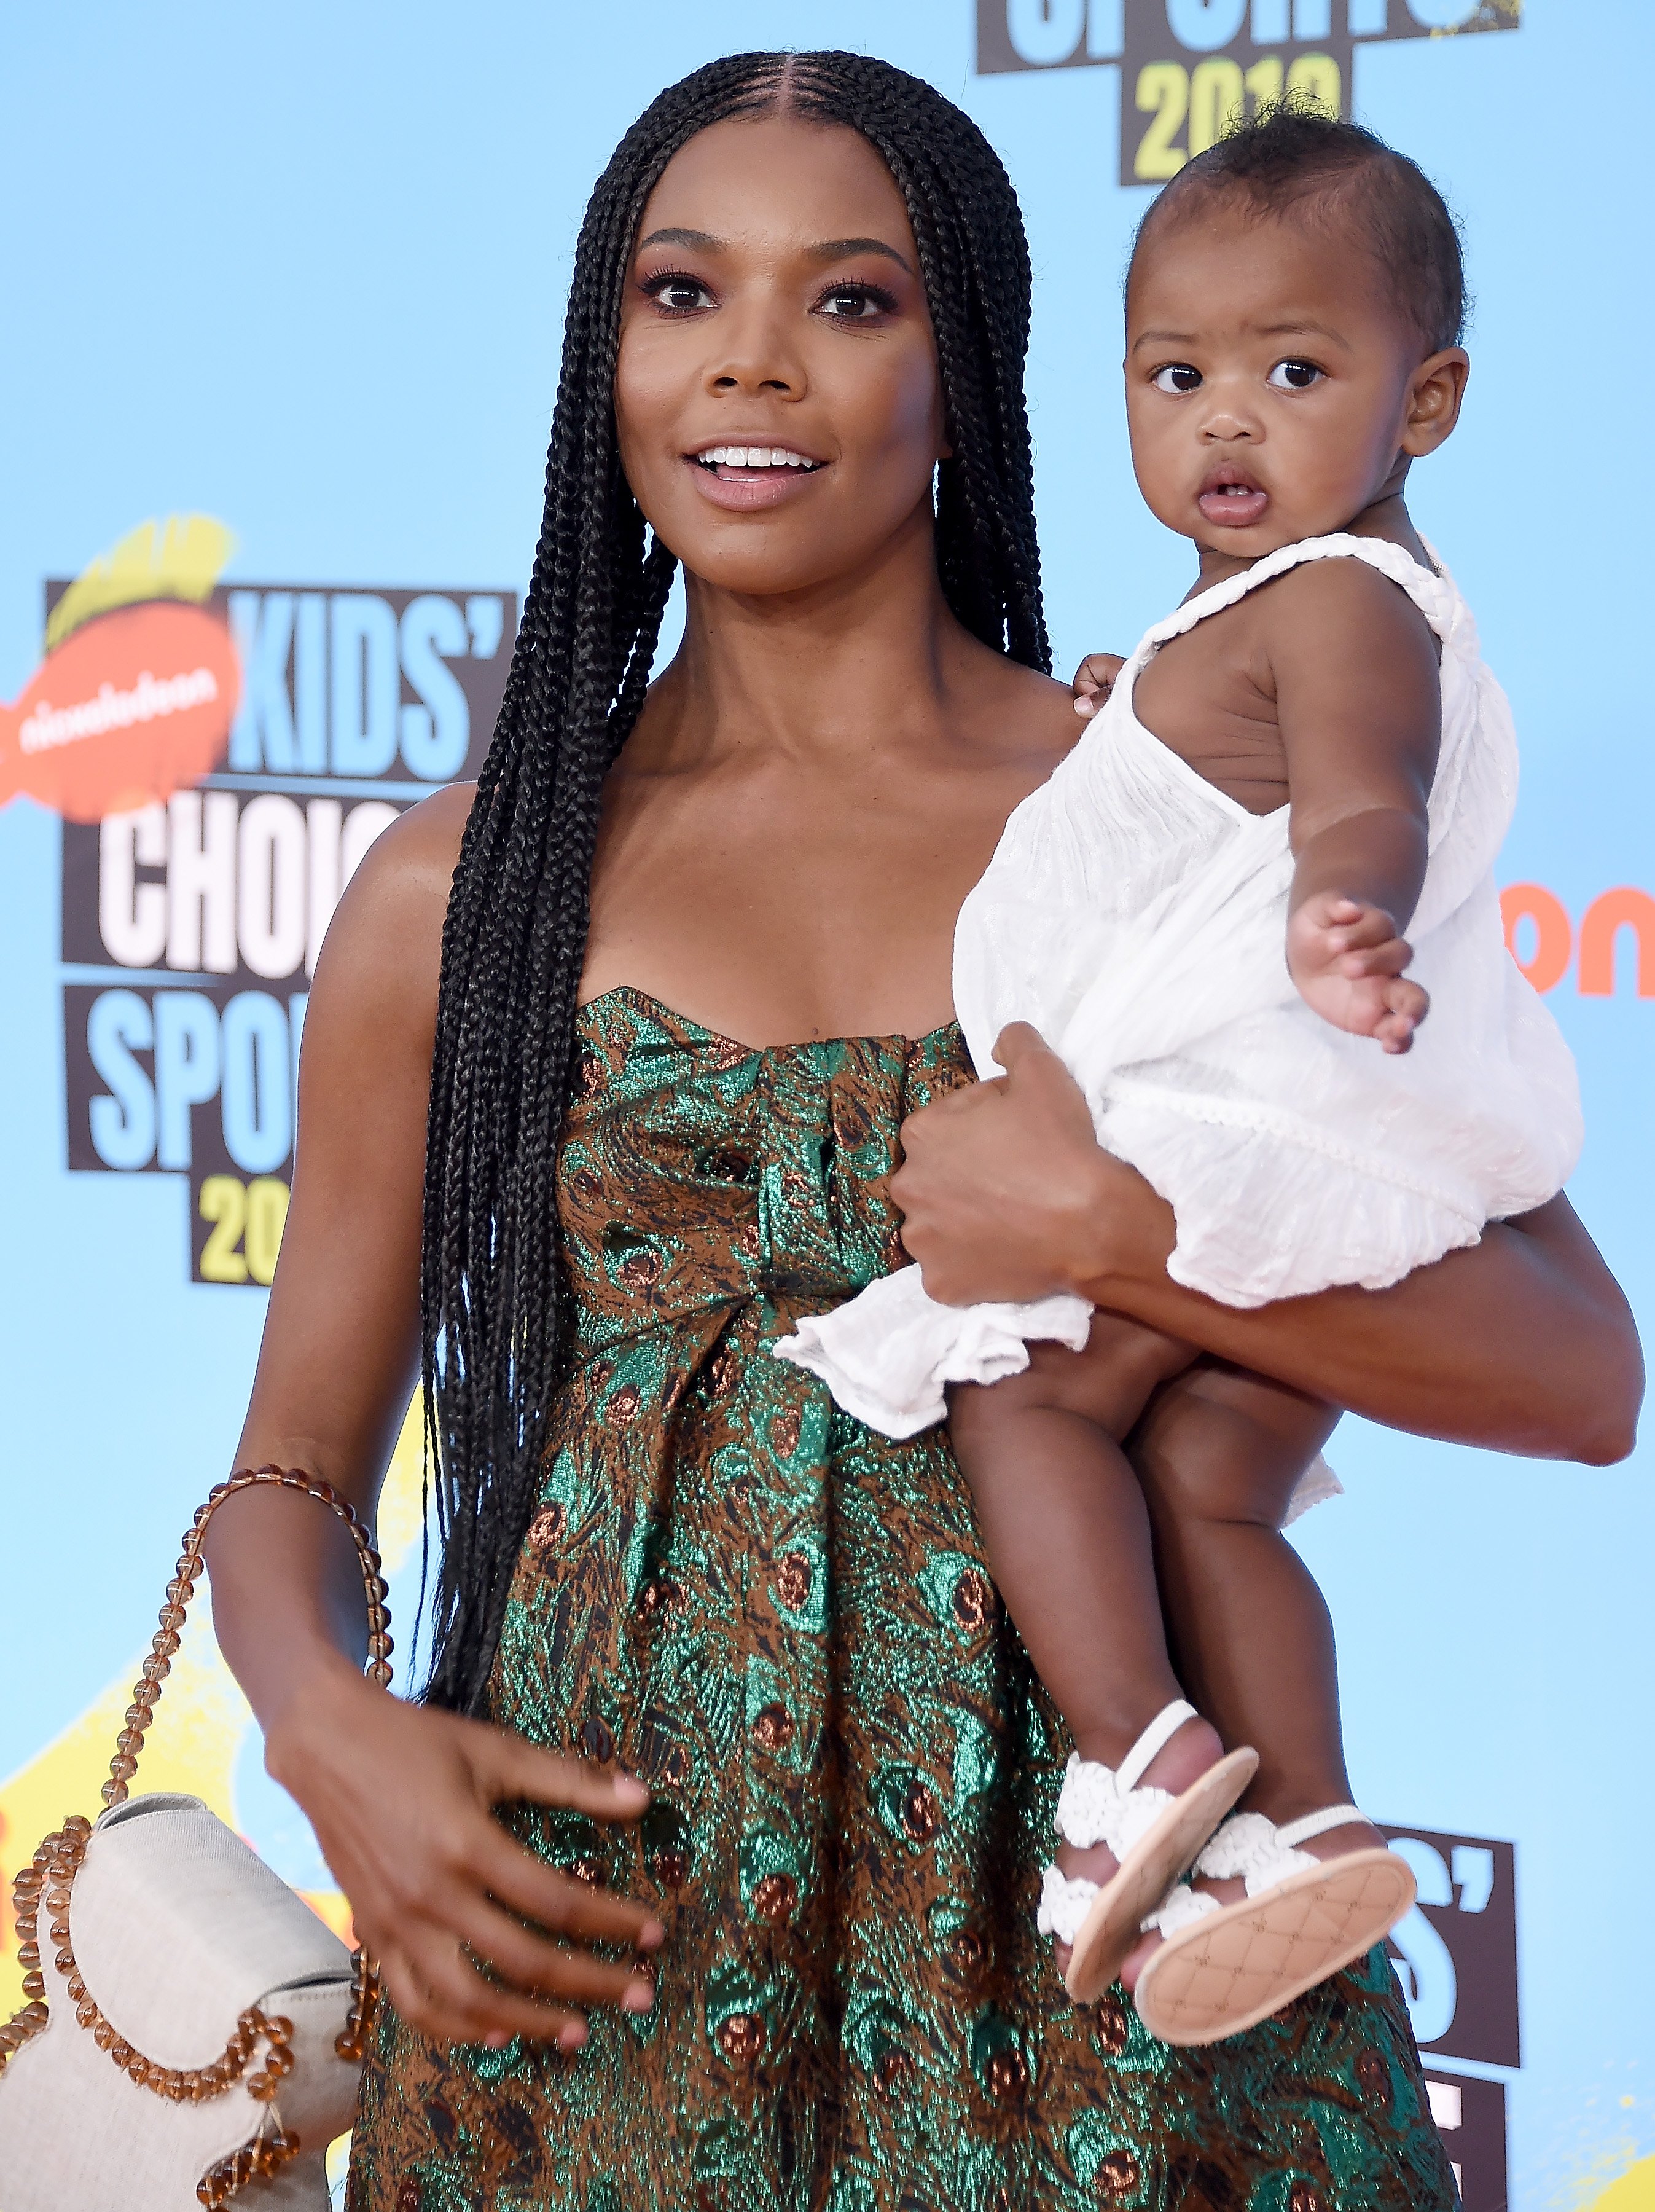 Gabrielle Union and Kaavia James Union Wade pictured at the Nickelodeon Kids' Choice Sports 2019 at Barker Hangar on July 11, 2019 in Santa Monica, California. | Source: Getty Images